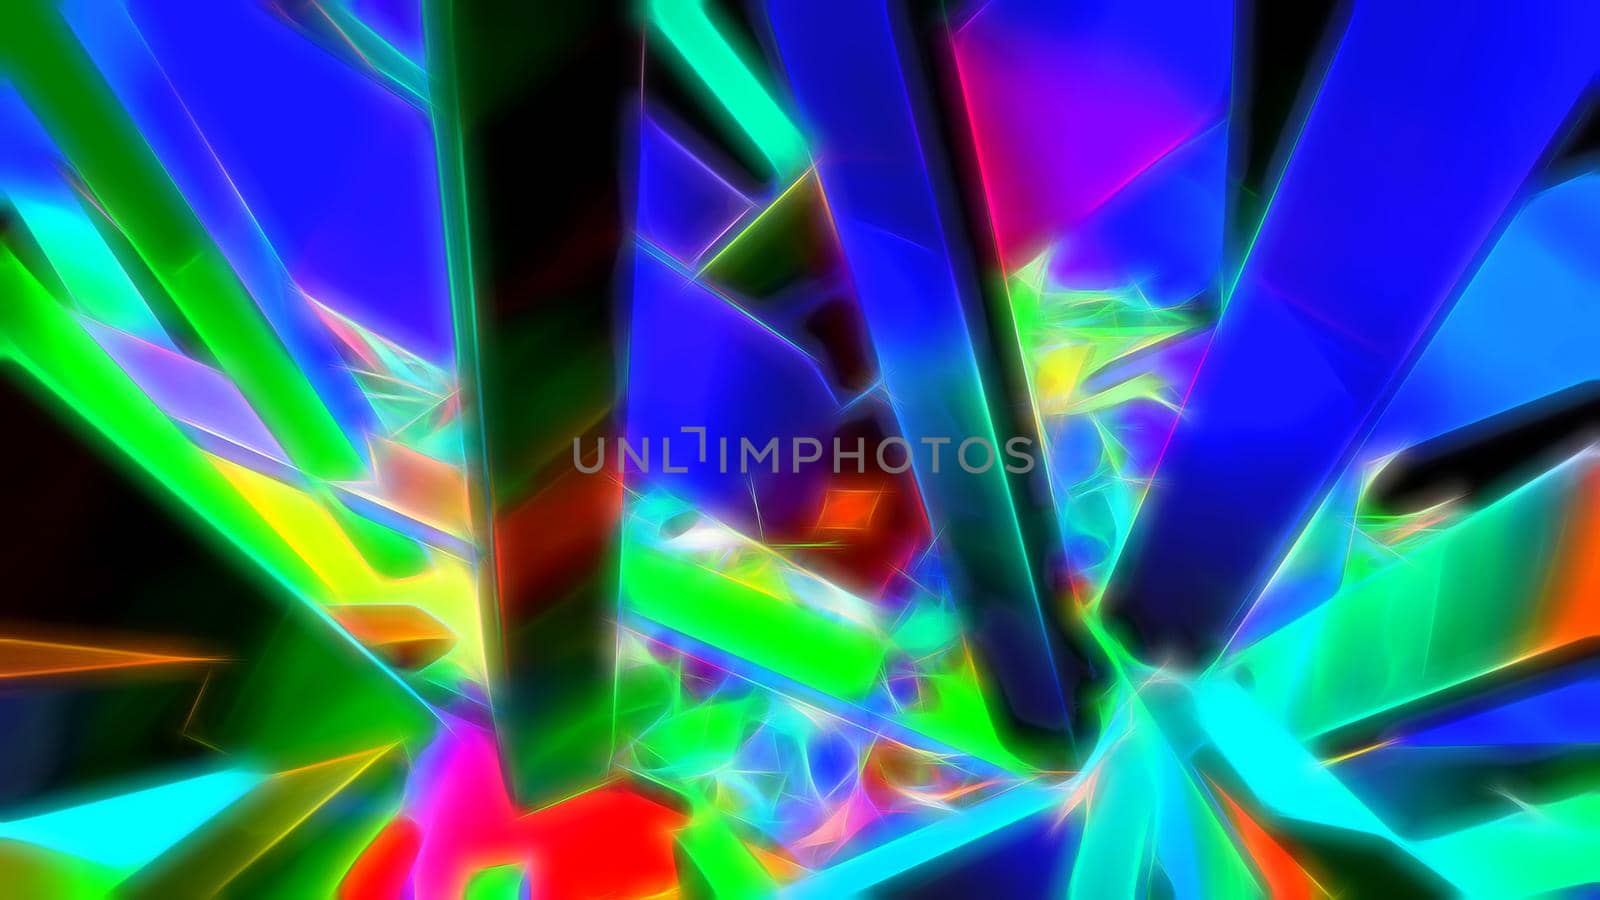 Abstract bright background with neon shapes.